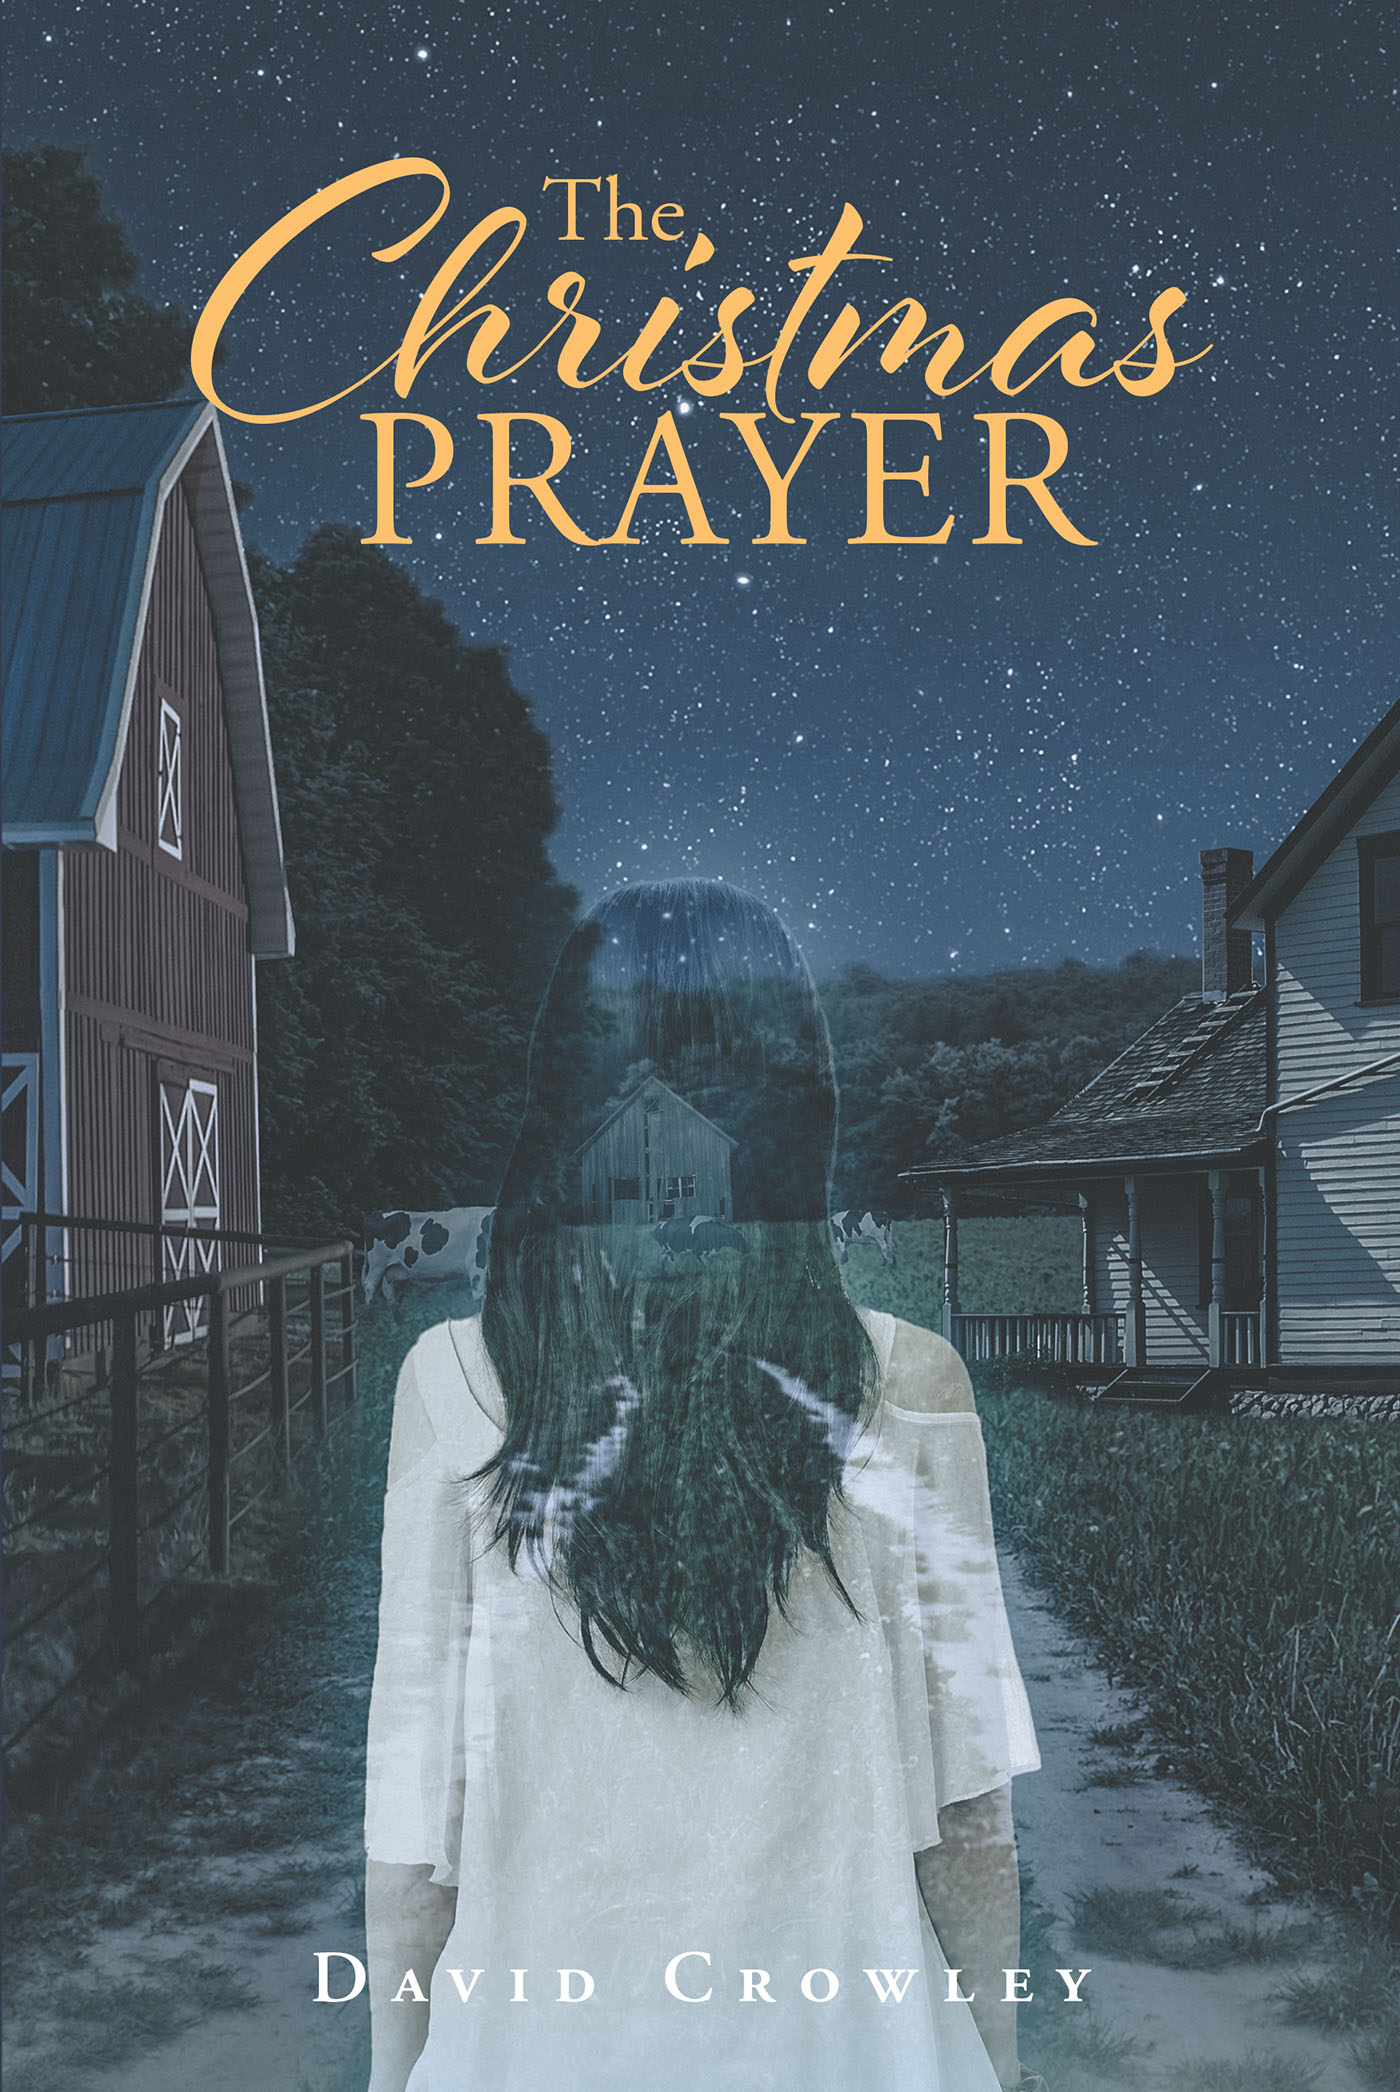 David Crowley’s Book, "The Christmas Prayer," an Engaging Story of a Woman Whose Dreams Help a Friend as He Tries to Solve a Recently Discovered Hundred-Year-Old Mystery